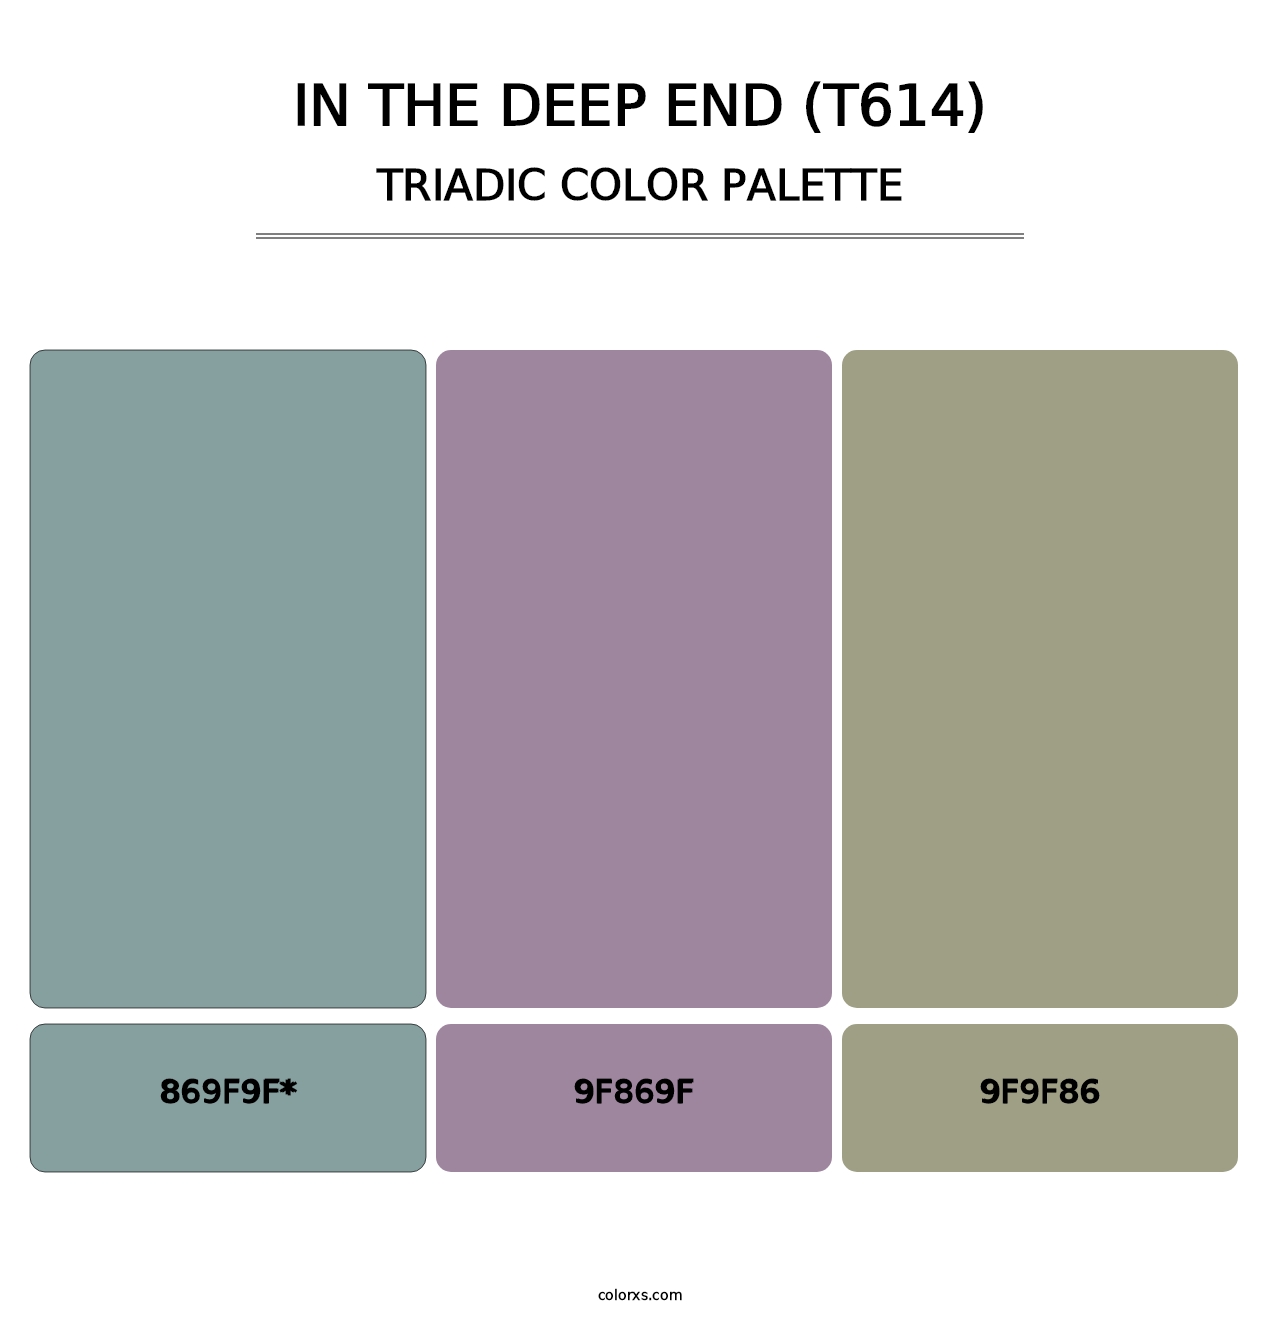 In the Deep End (T614) - Triadic Color Palette